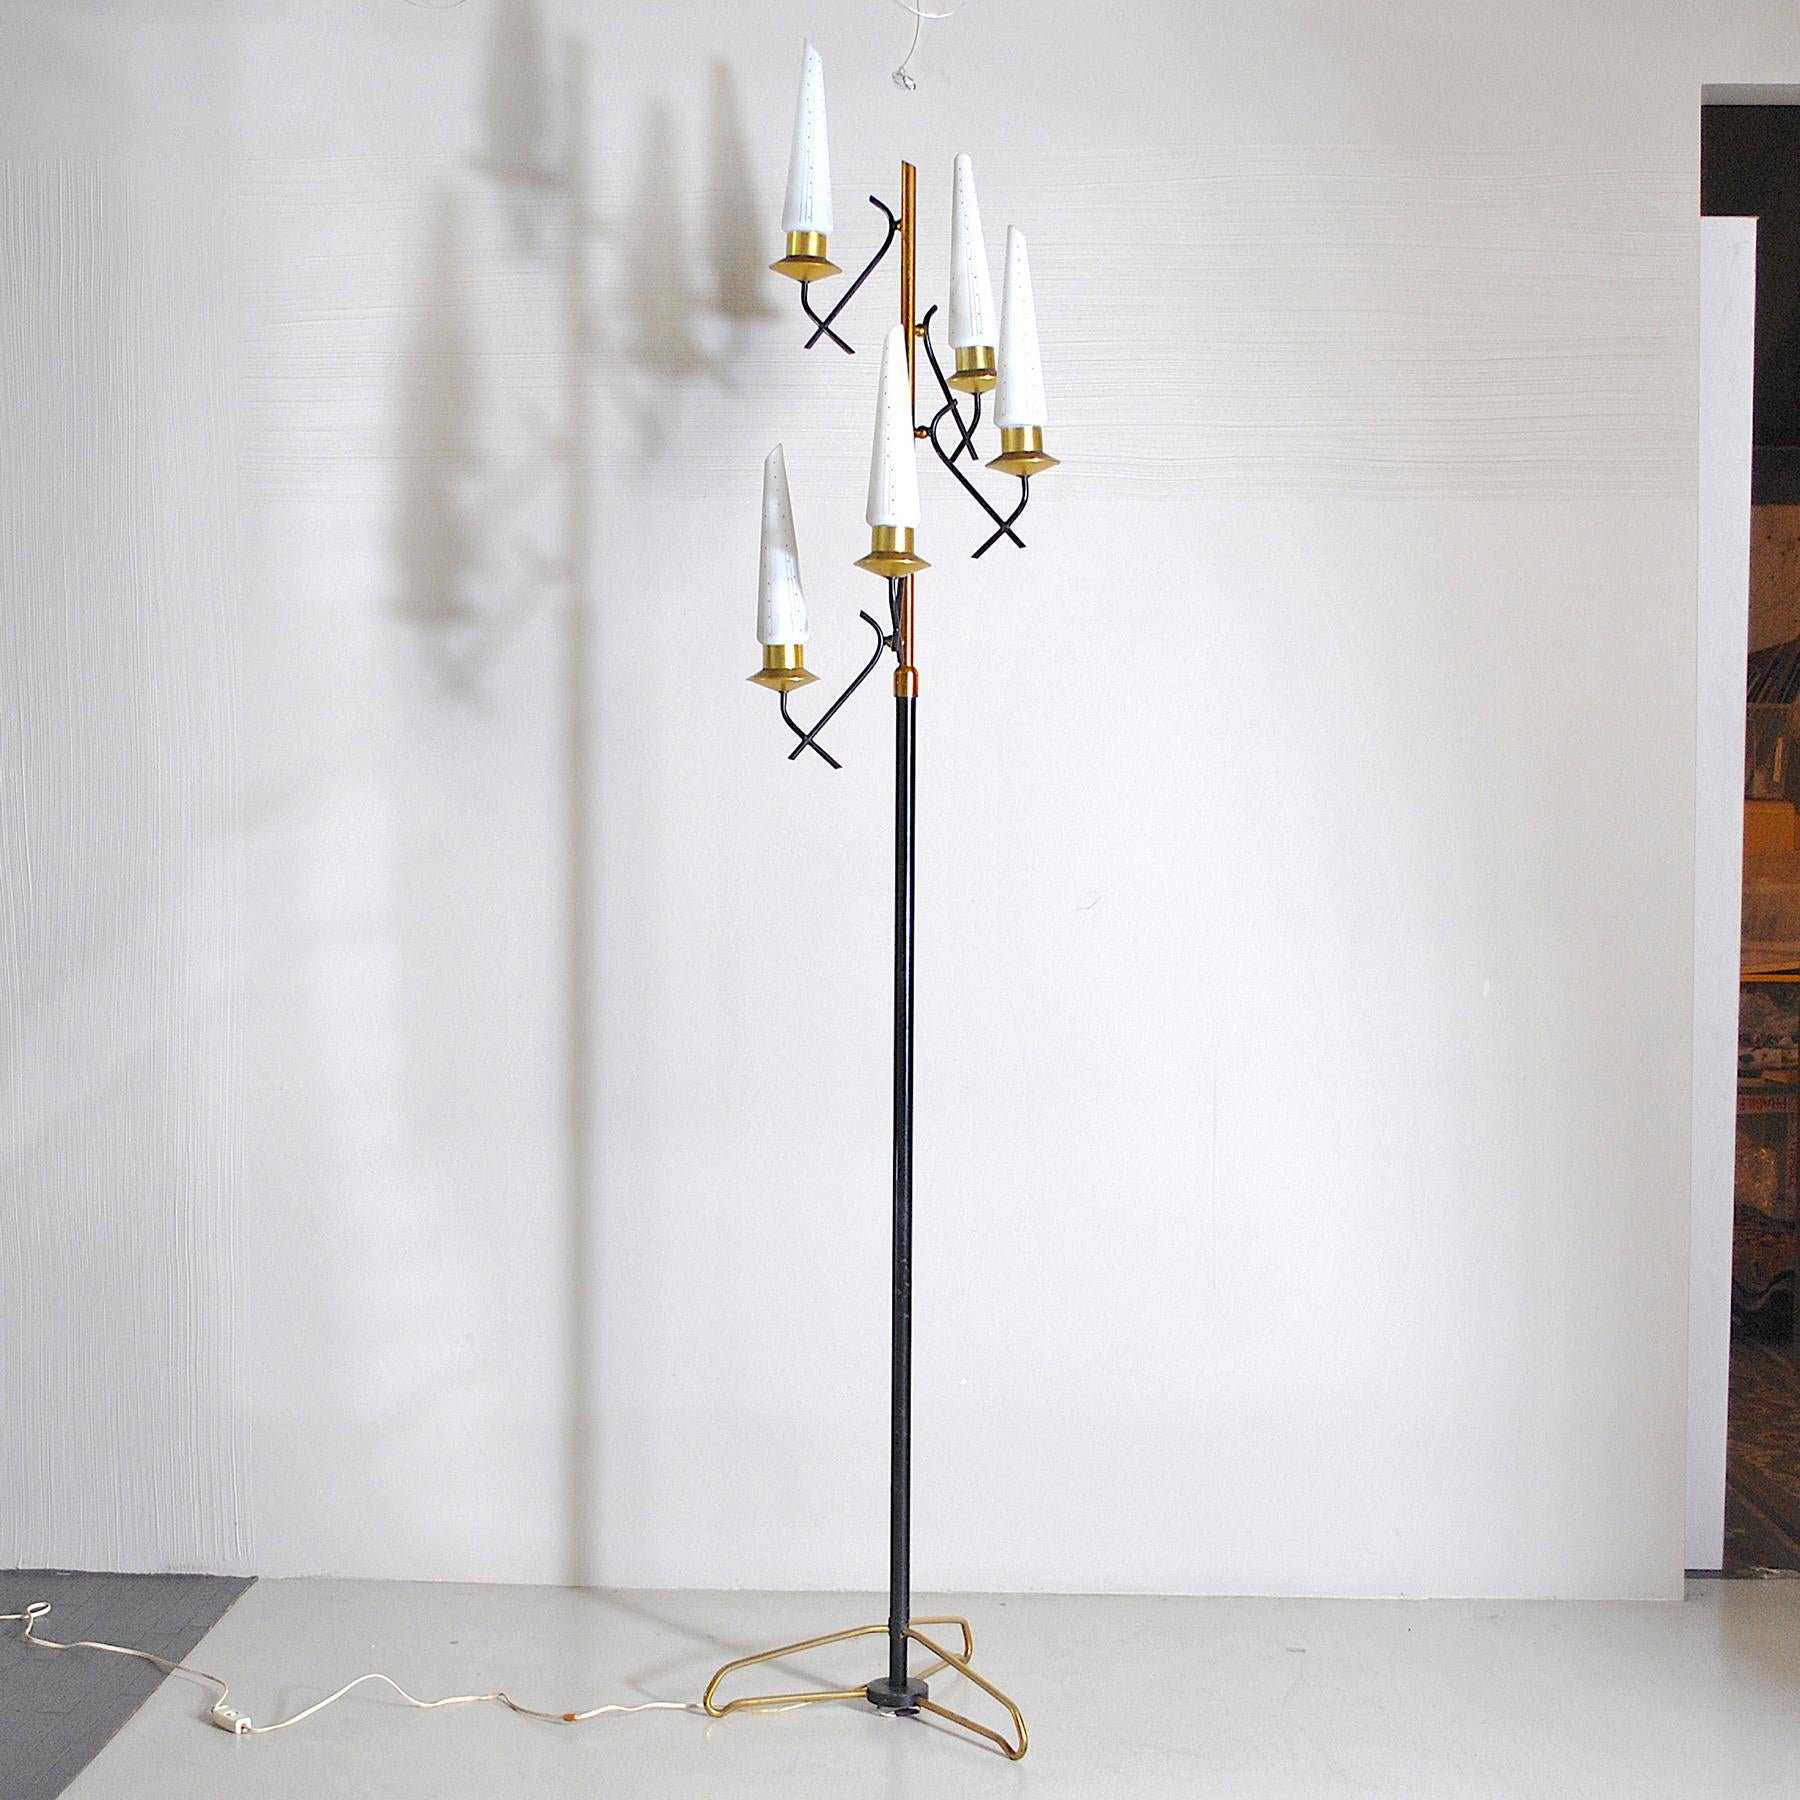 Floor lamp with six lighting bodies by Stilnovo in brass and opaline glass from the 1950s
Bruno Gatta joined the company with his brother Paolo, who had just graduated, and in September they opened 'Stilnovo Srl', with a capital of 400,000 lire.